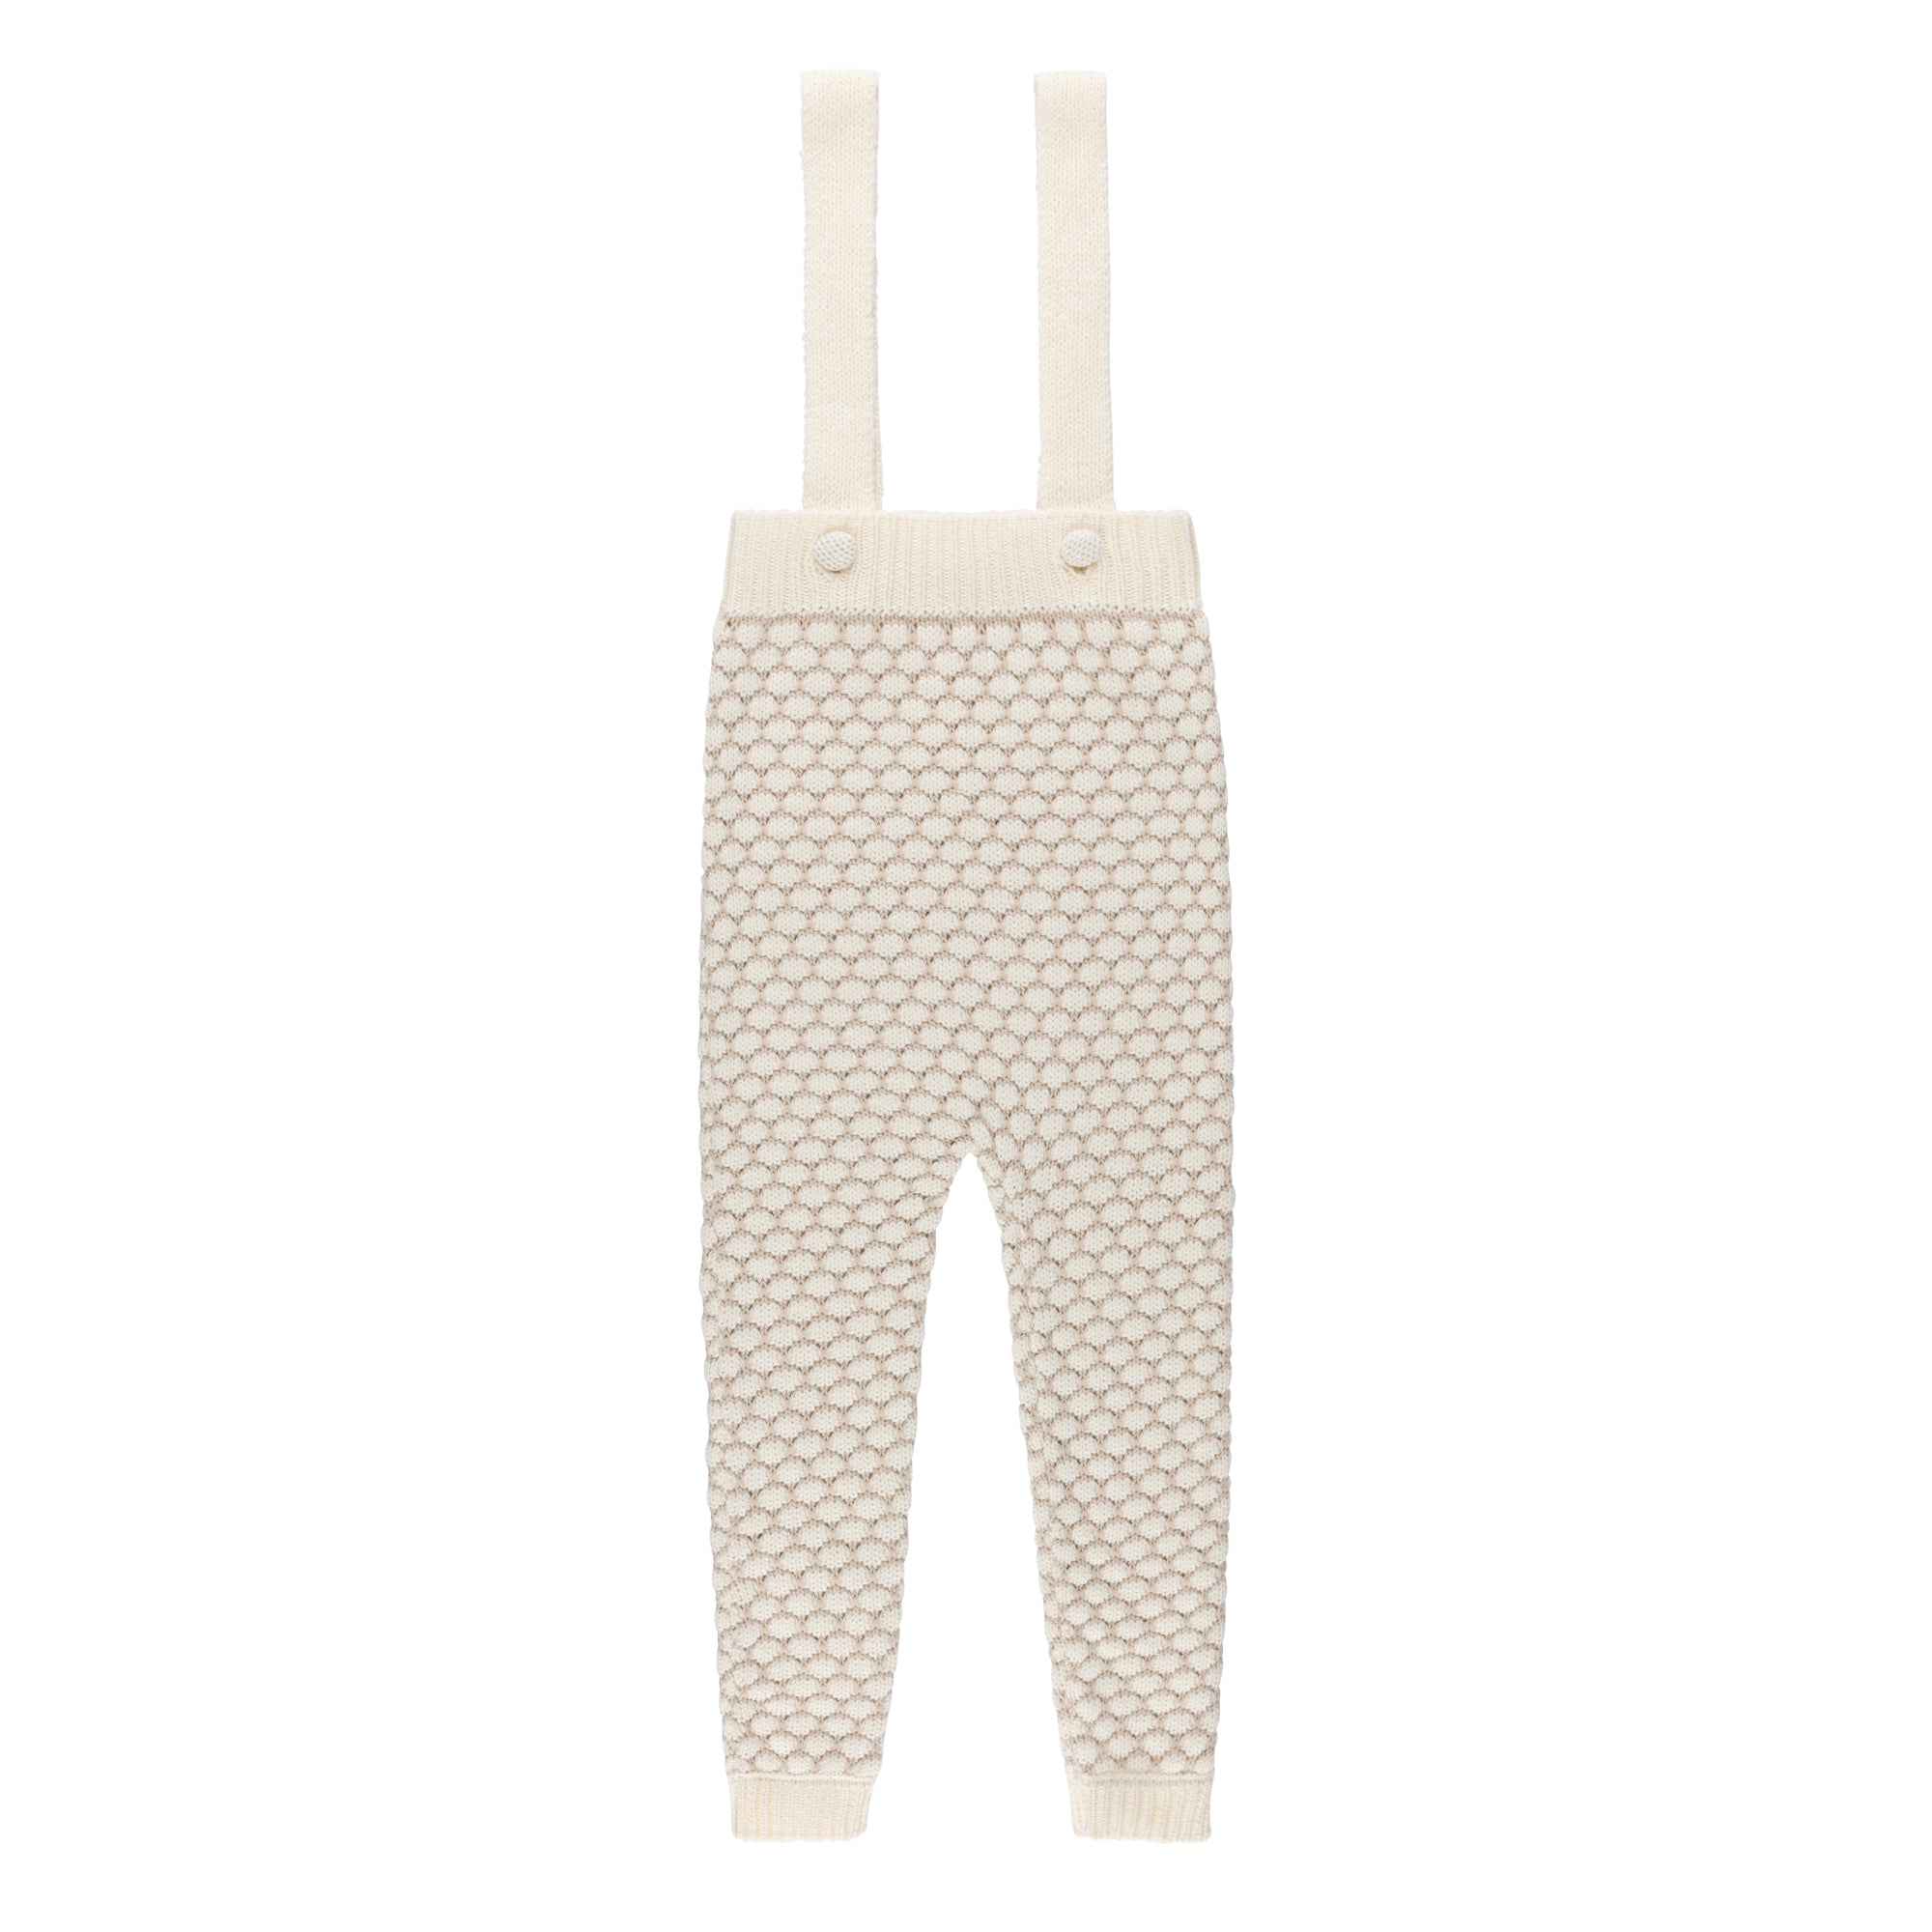 Popcorn Knit Collection - Overalls